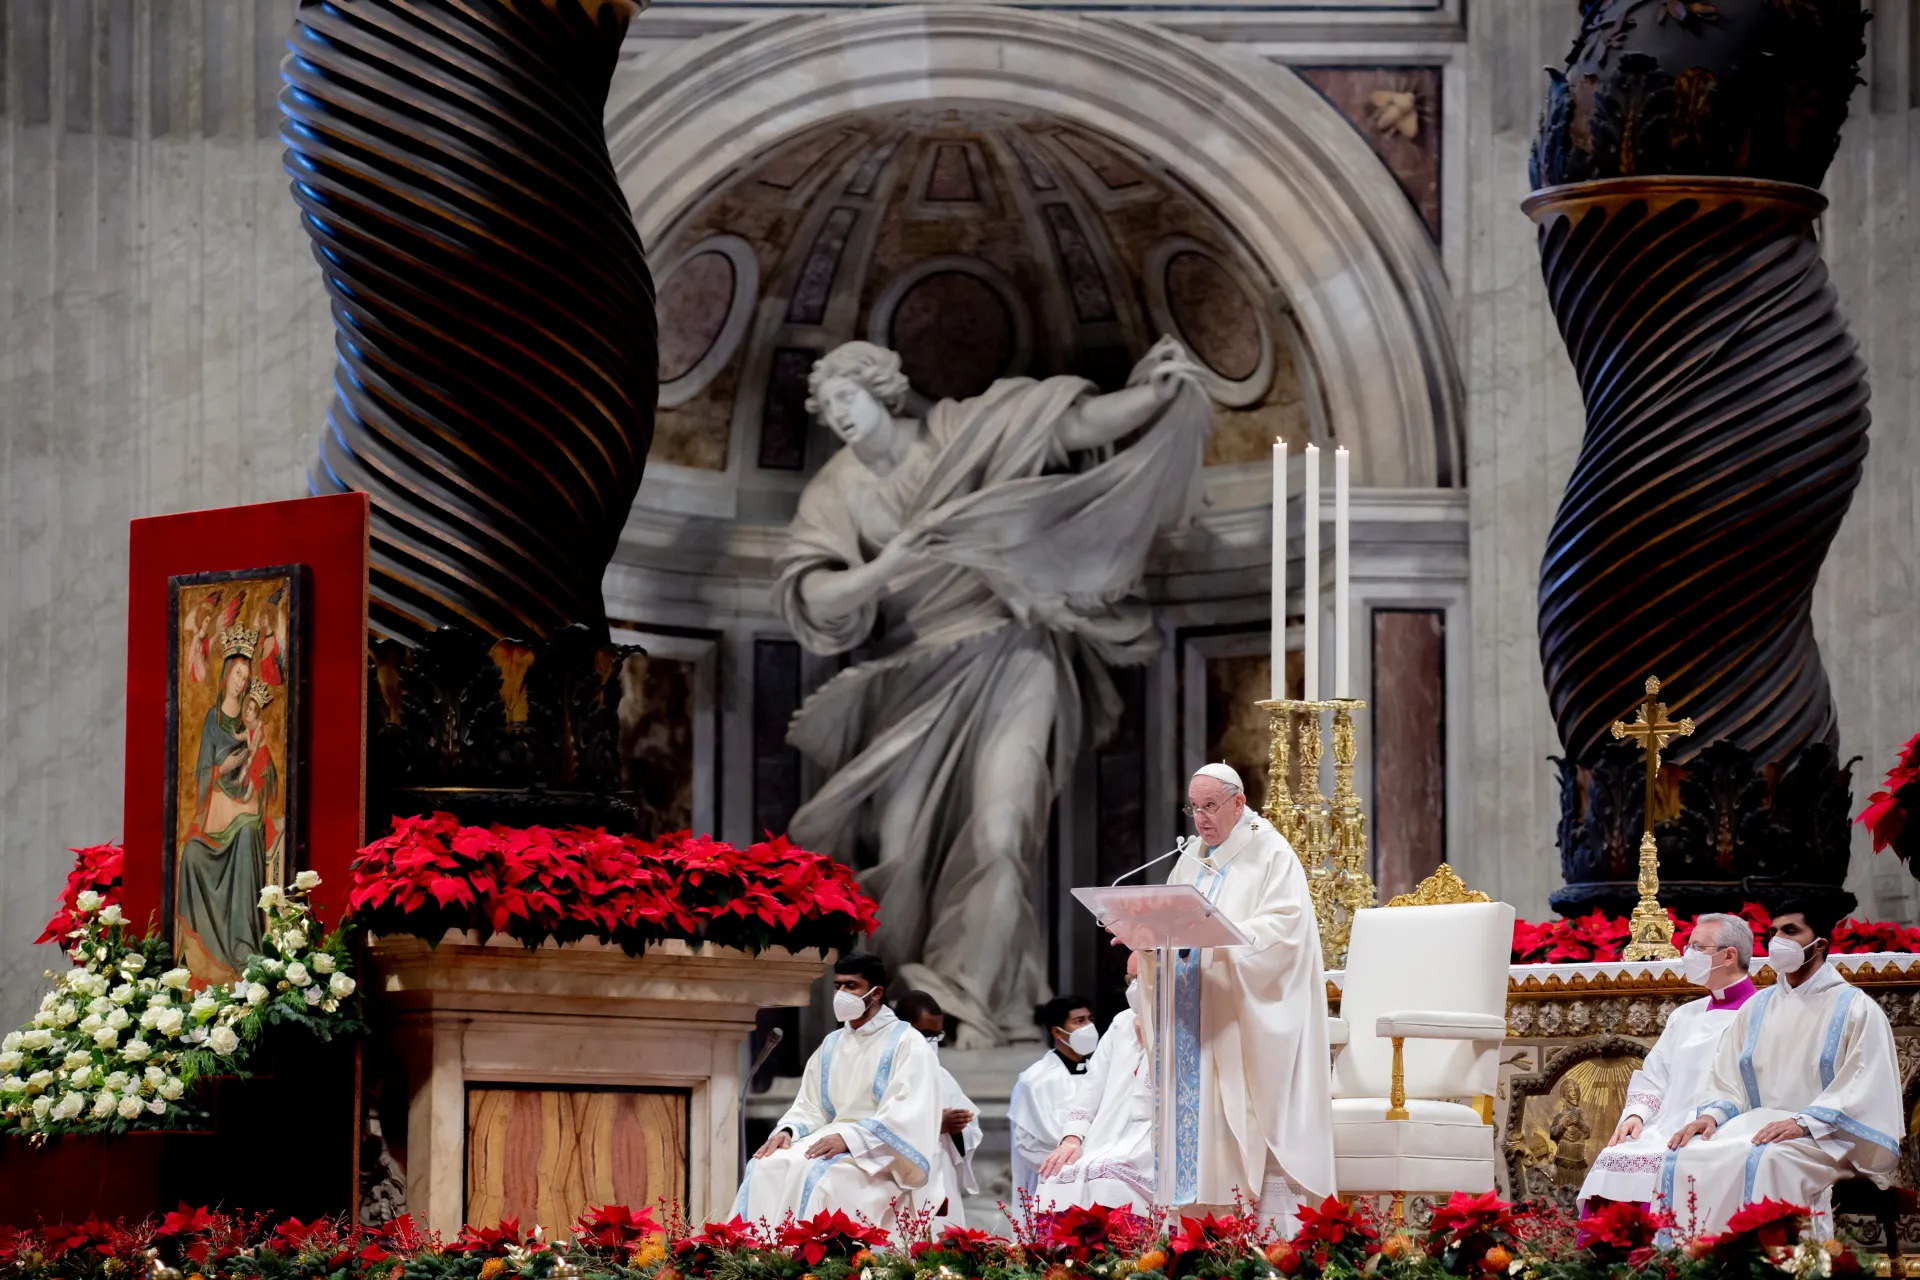 Pope Francis offers Mass for the Solemnity of Mary, Mother of God in St. Peter's Basilica on January 1, 2022.?w=200&h=150